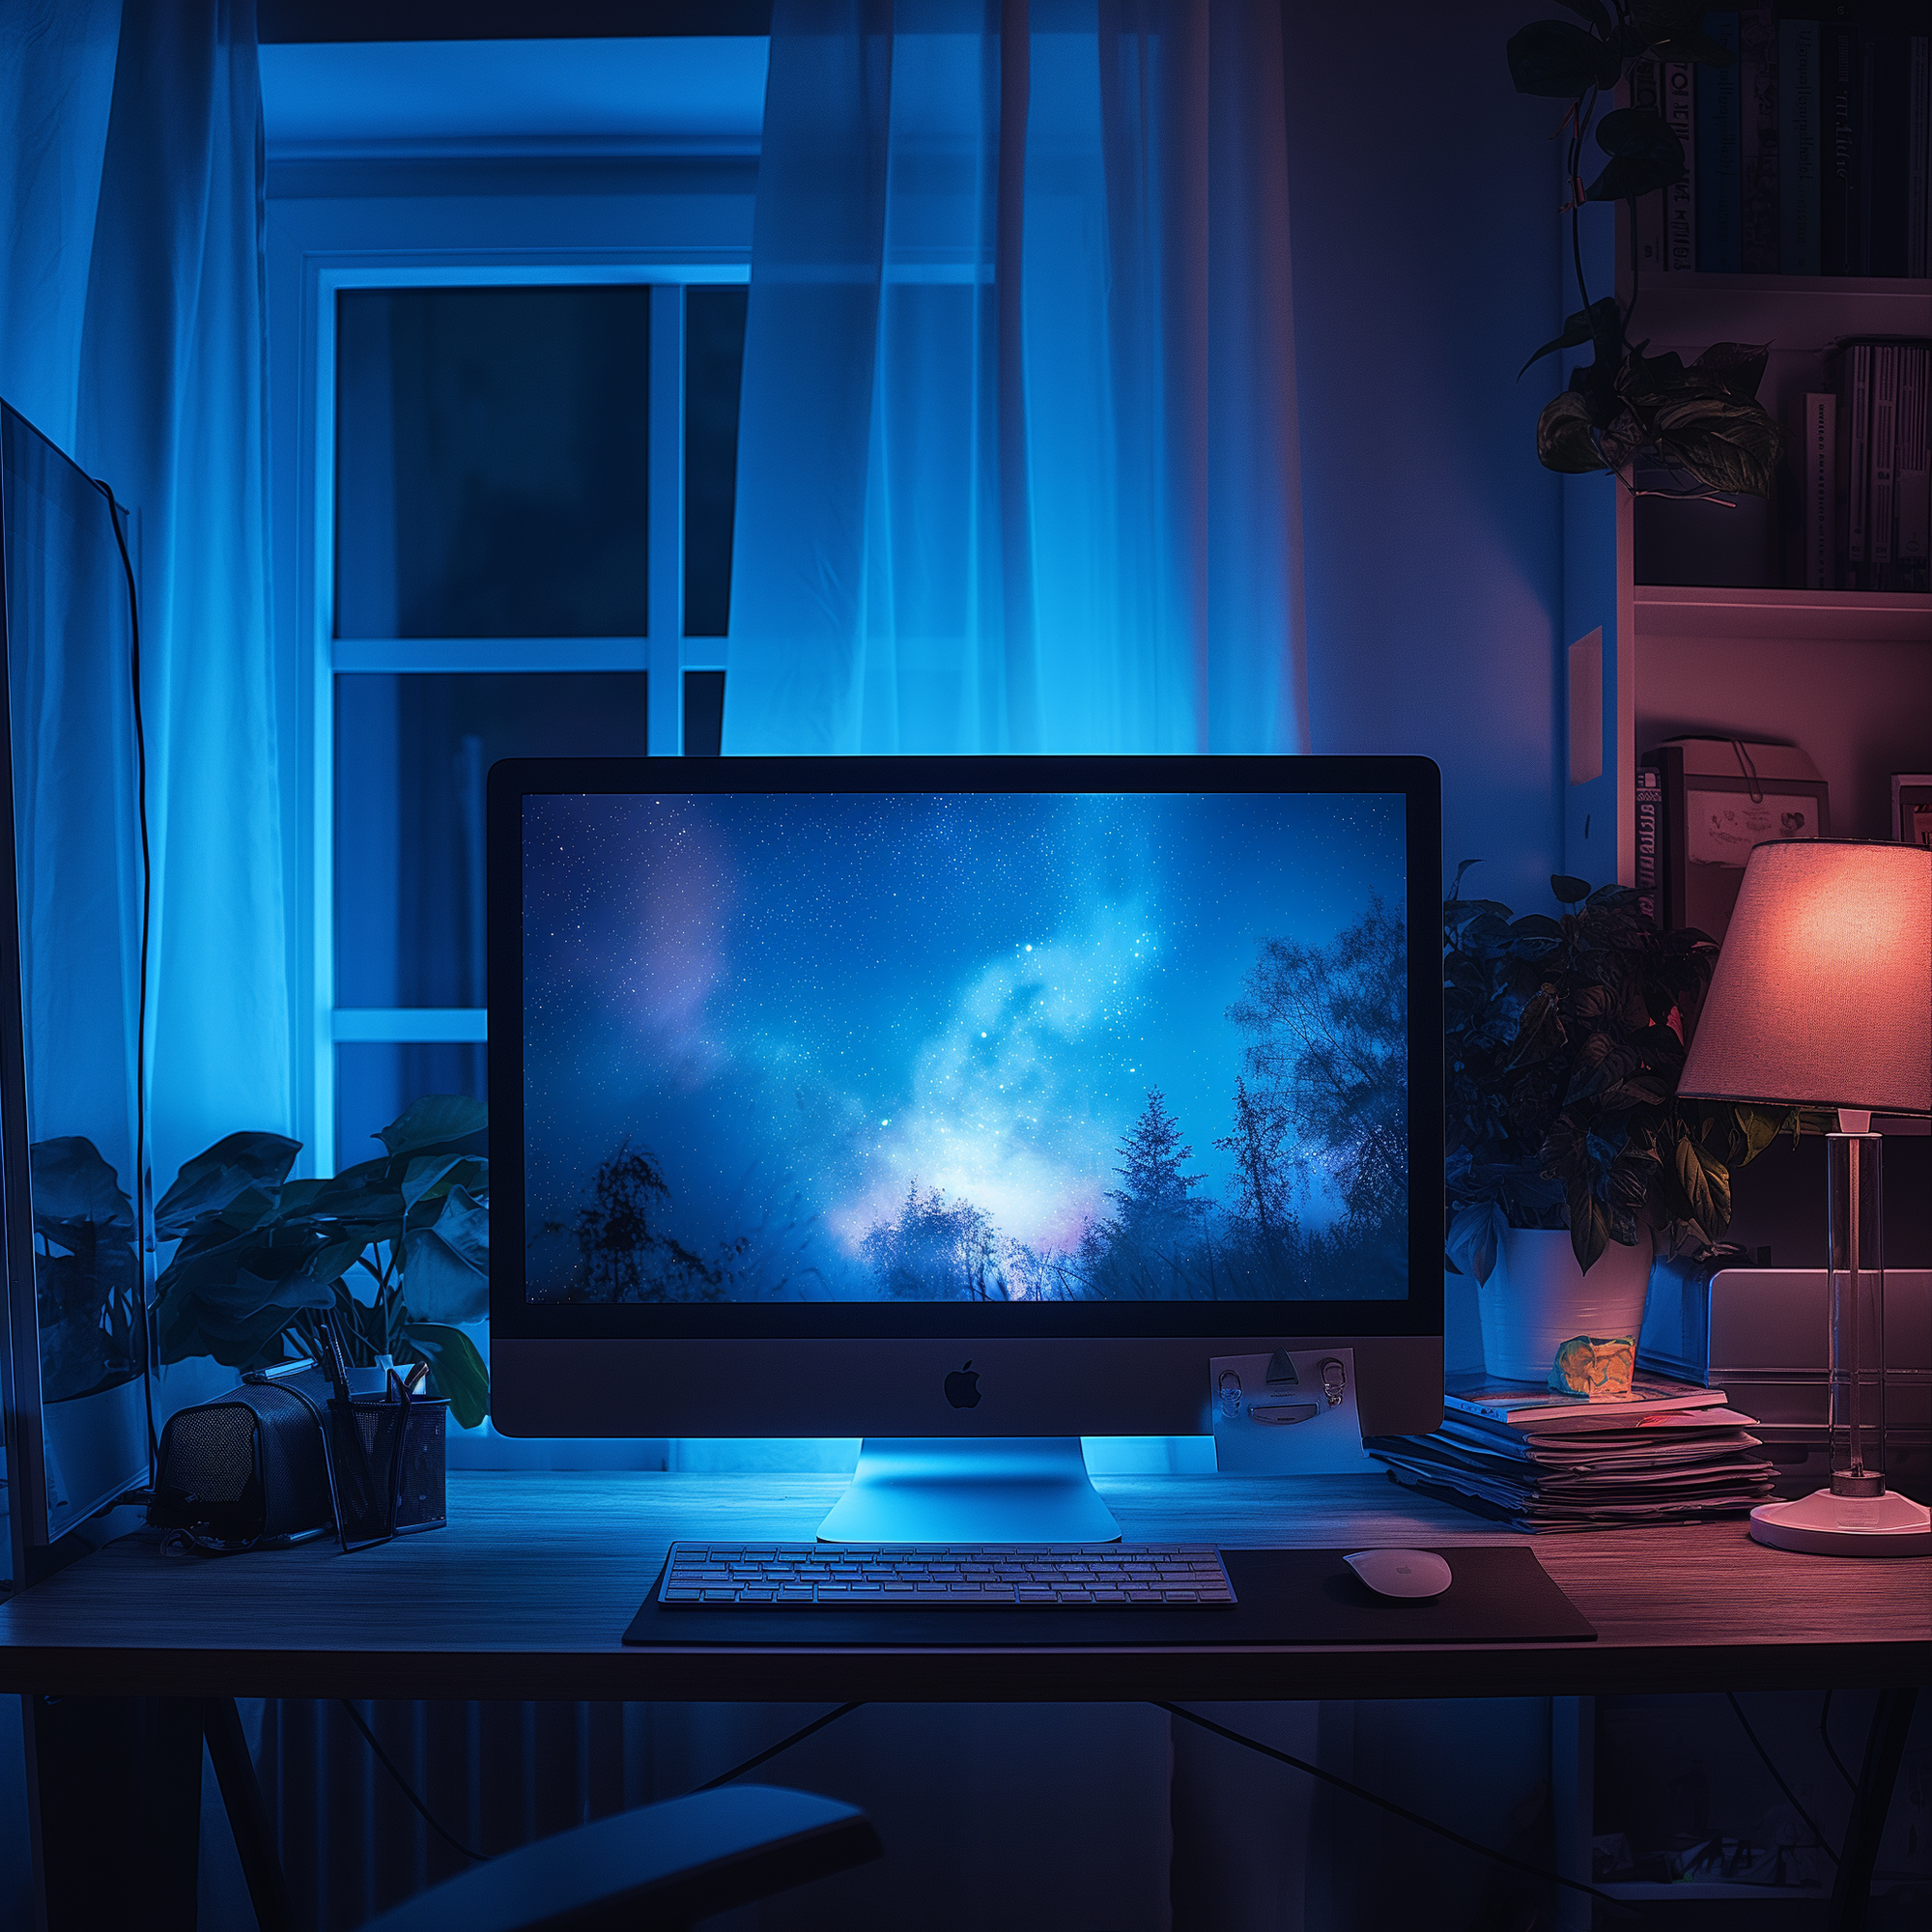 An image of a computer monitor emitting blue light.